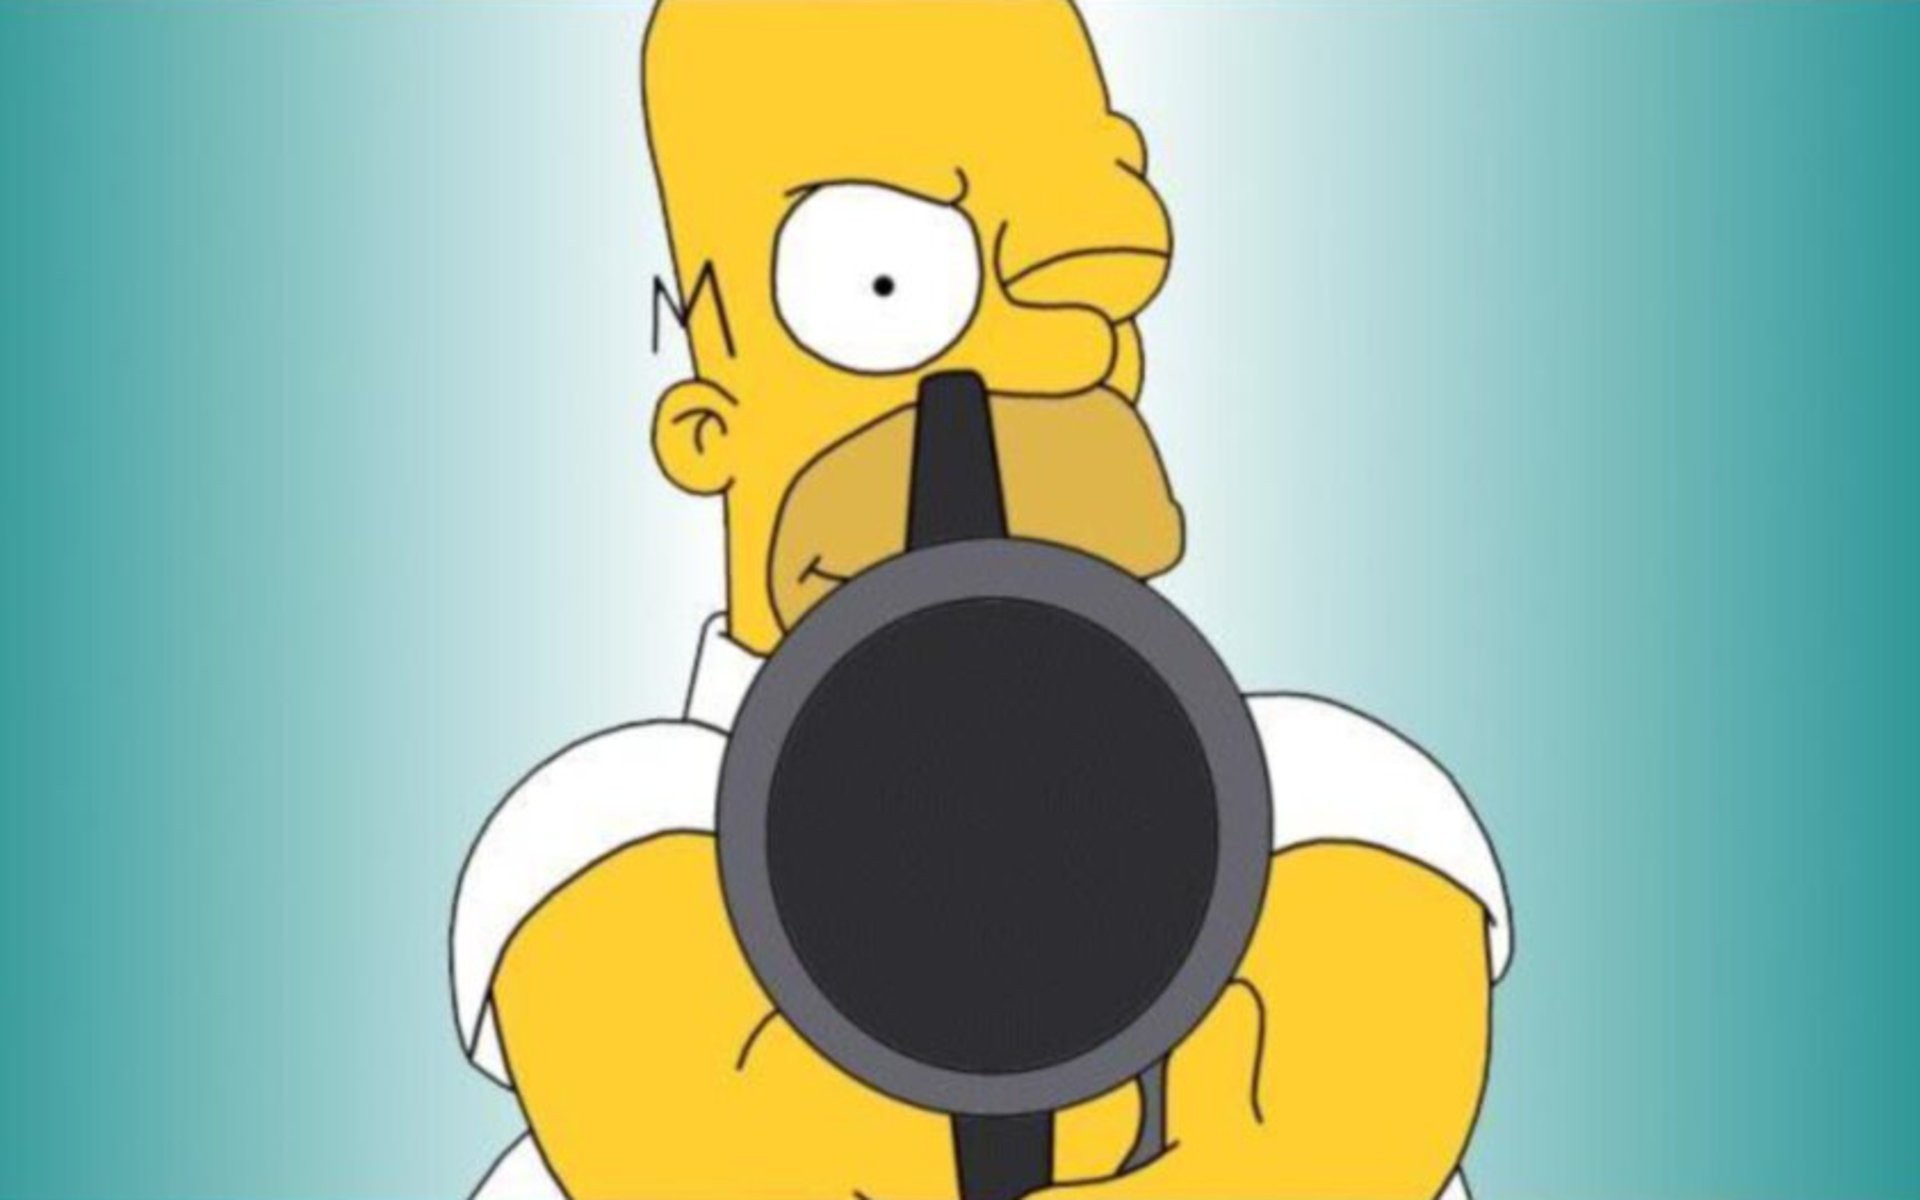 The Simpsons HD Wallpapers Group (86+)